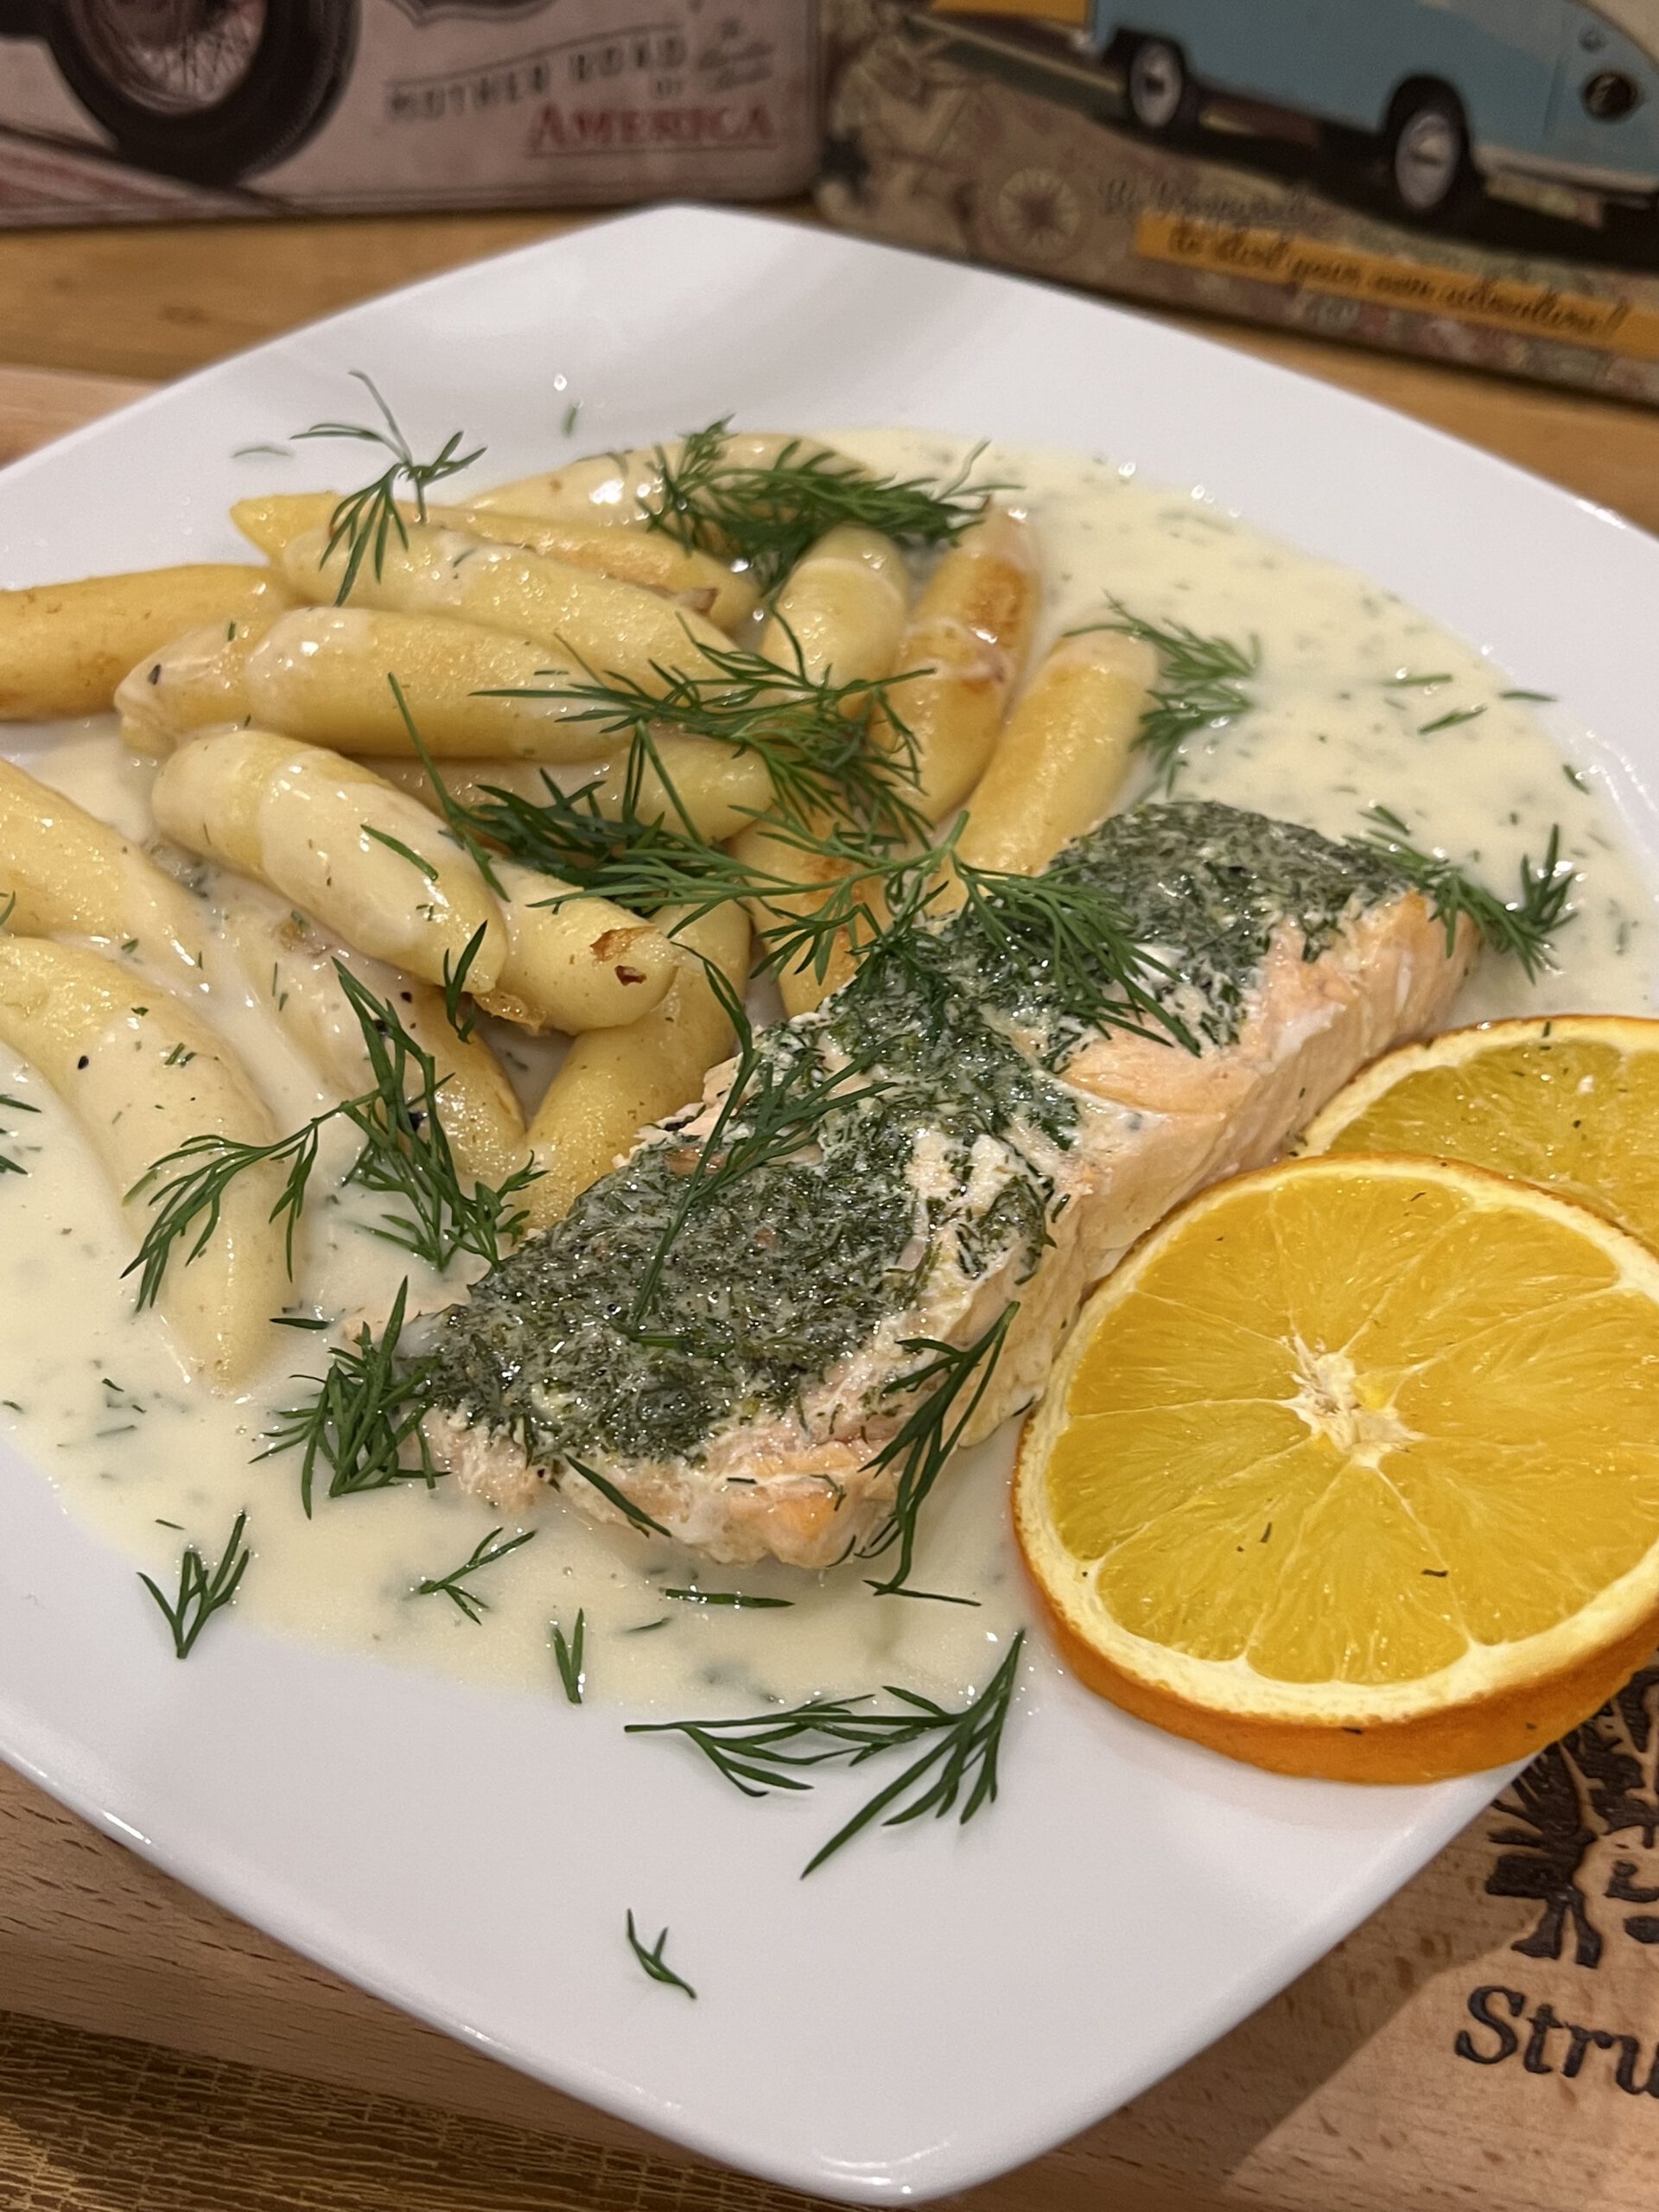 You are currently viewing Ofenlachs in Orangen-Dill-Sahnesauce